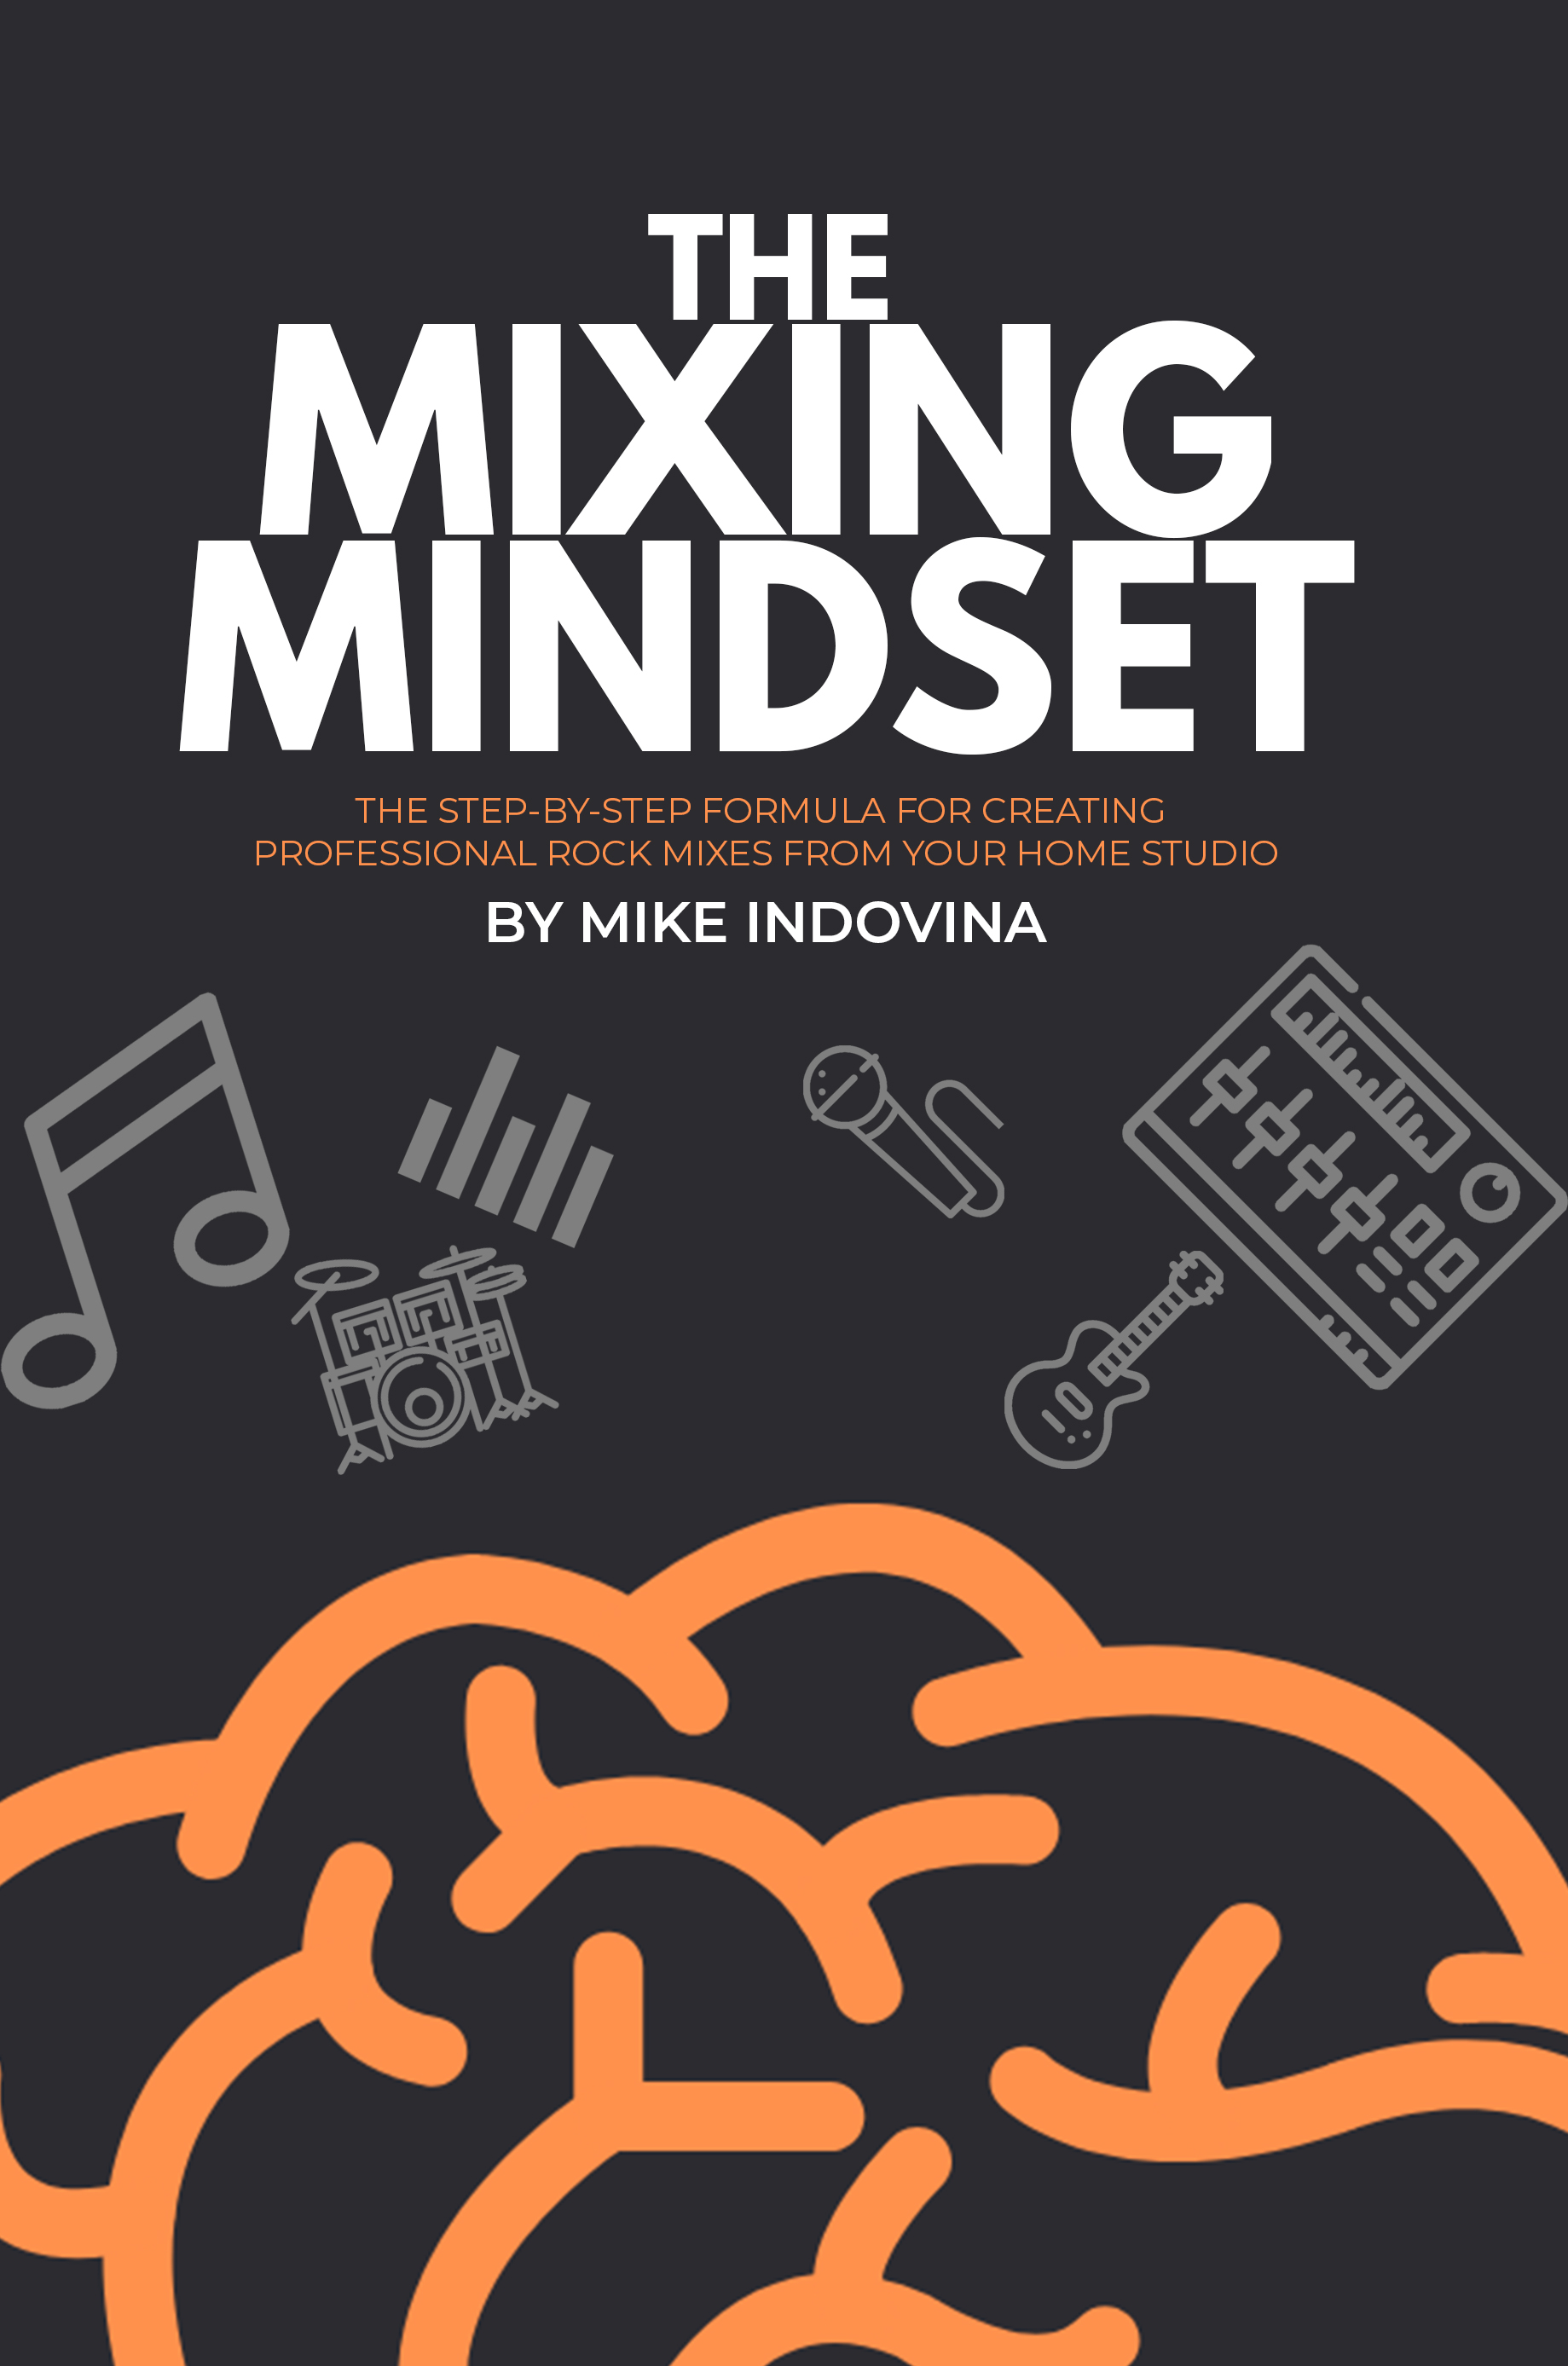 FREE: The Mixing Mindset:  The Step-By-Step Formula For Creating Professional Rock Mixes From Your Home Studio by Mike Indovina